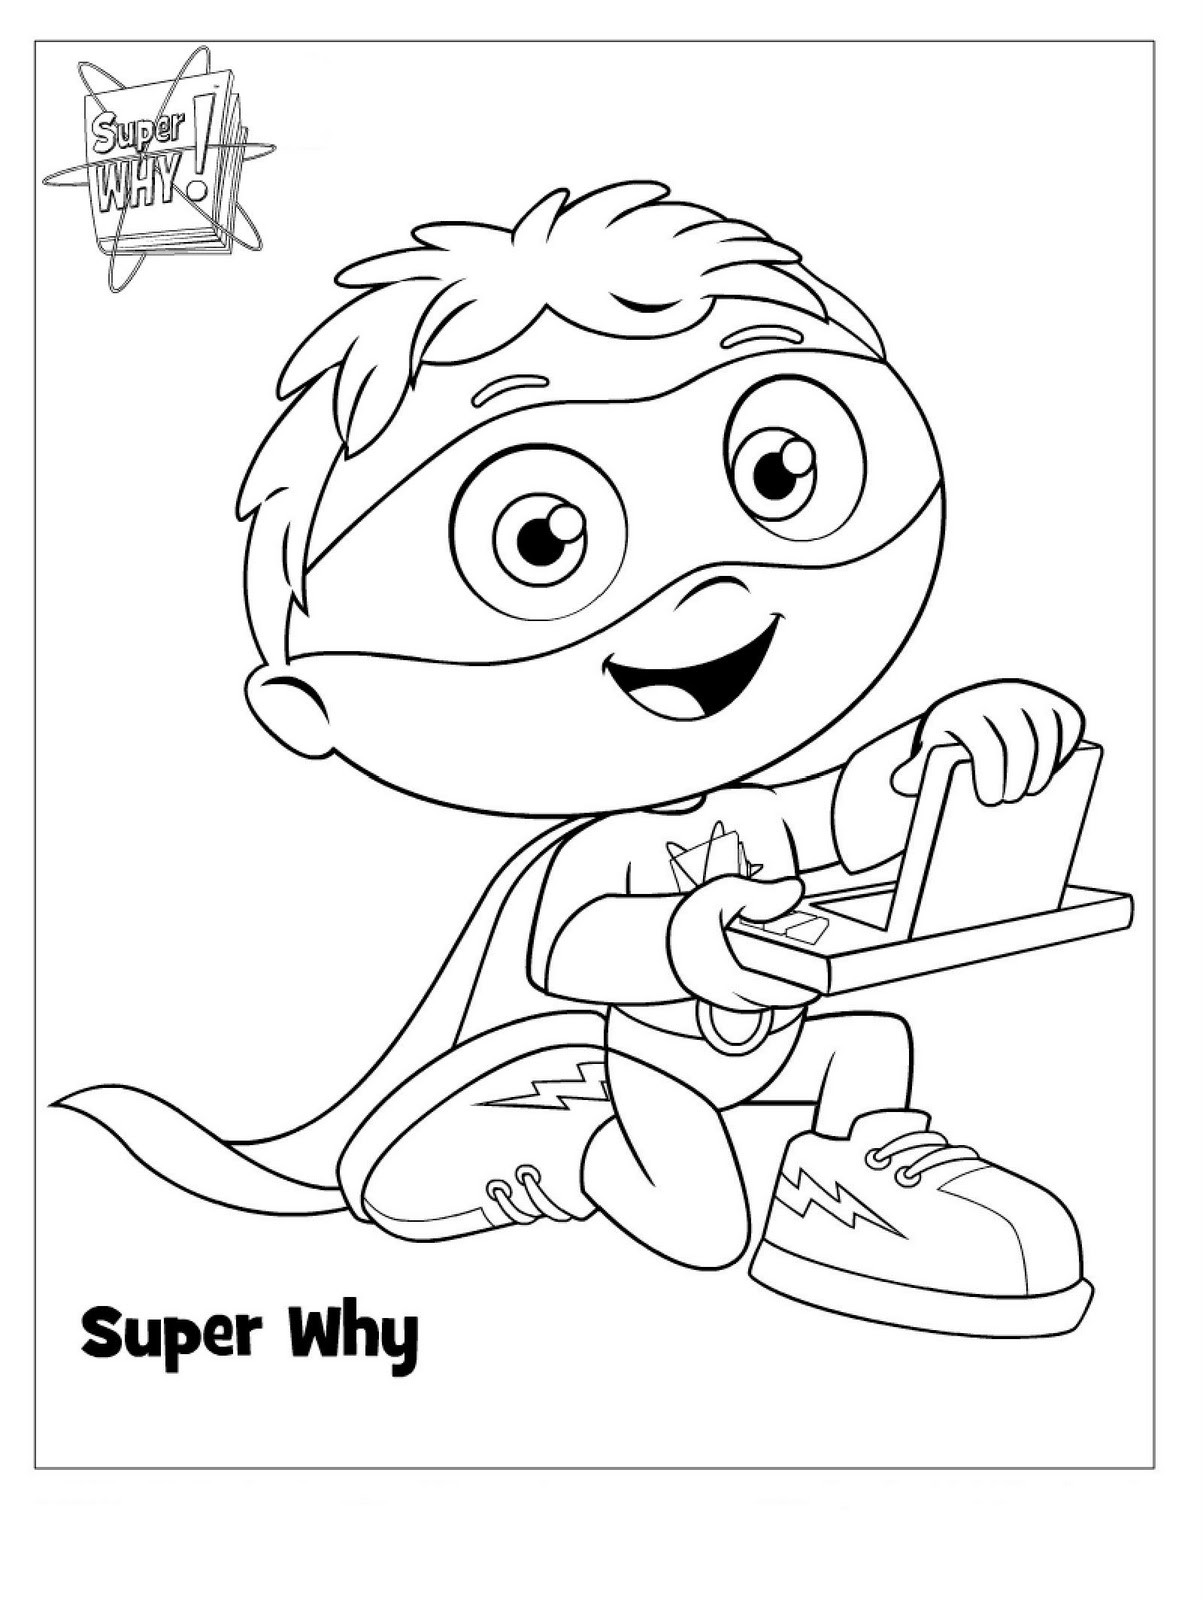 Best Coloring Pages For Kids
 Super Why Coloring Pages Best Coloring Pages For Kids